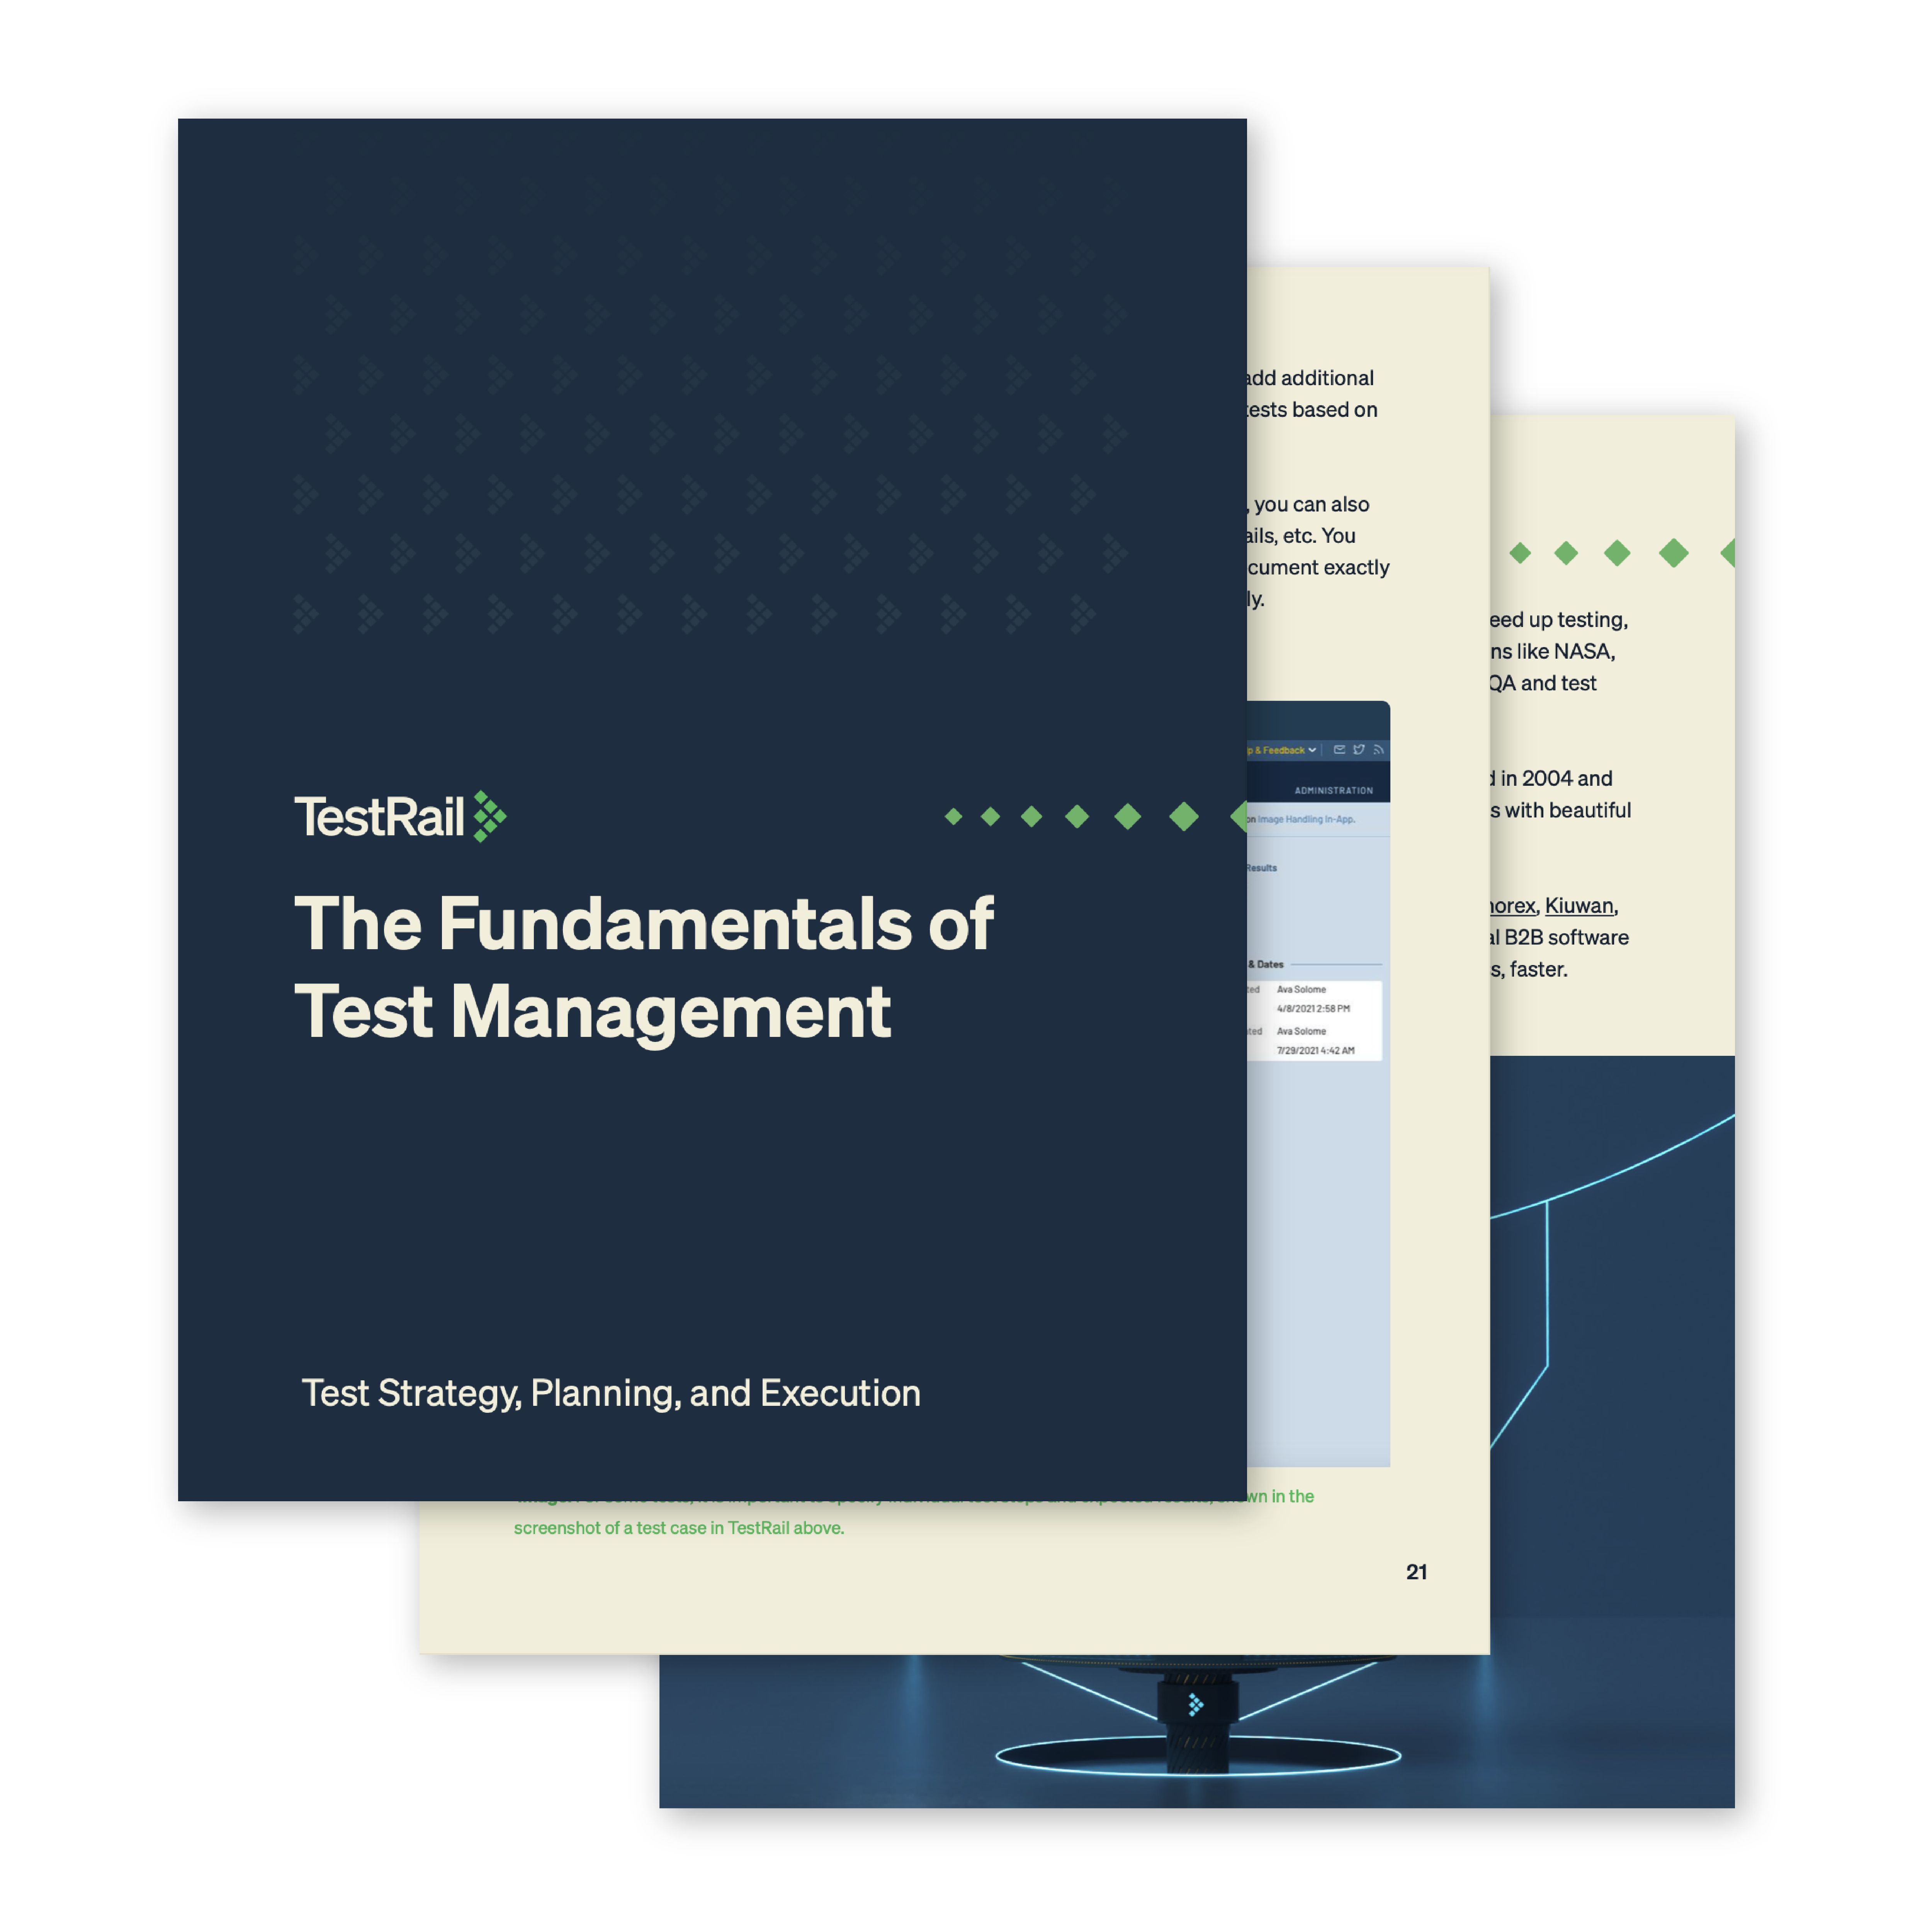 The Fundamentals of Test Management